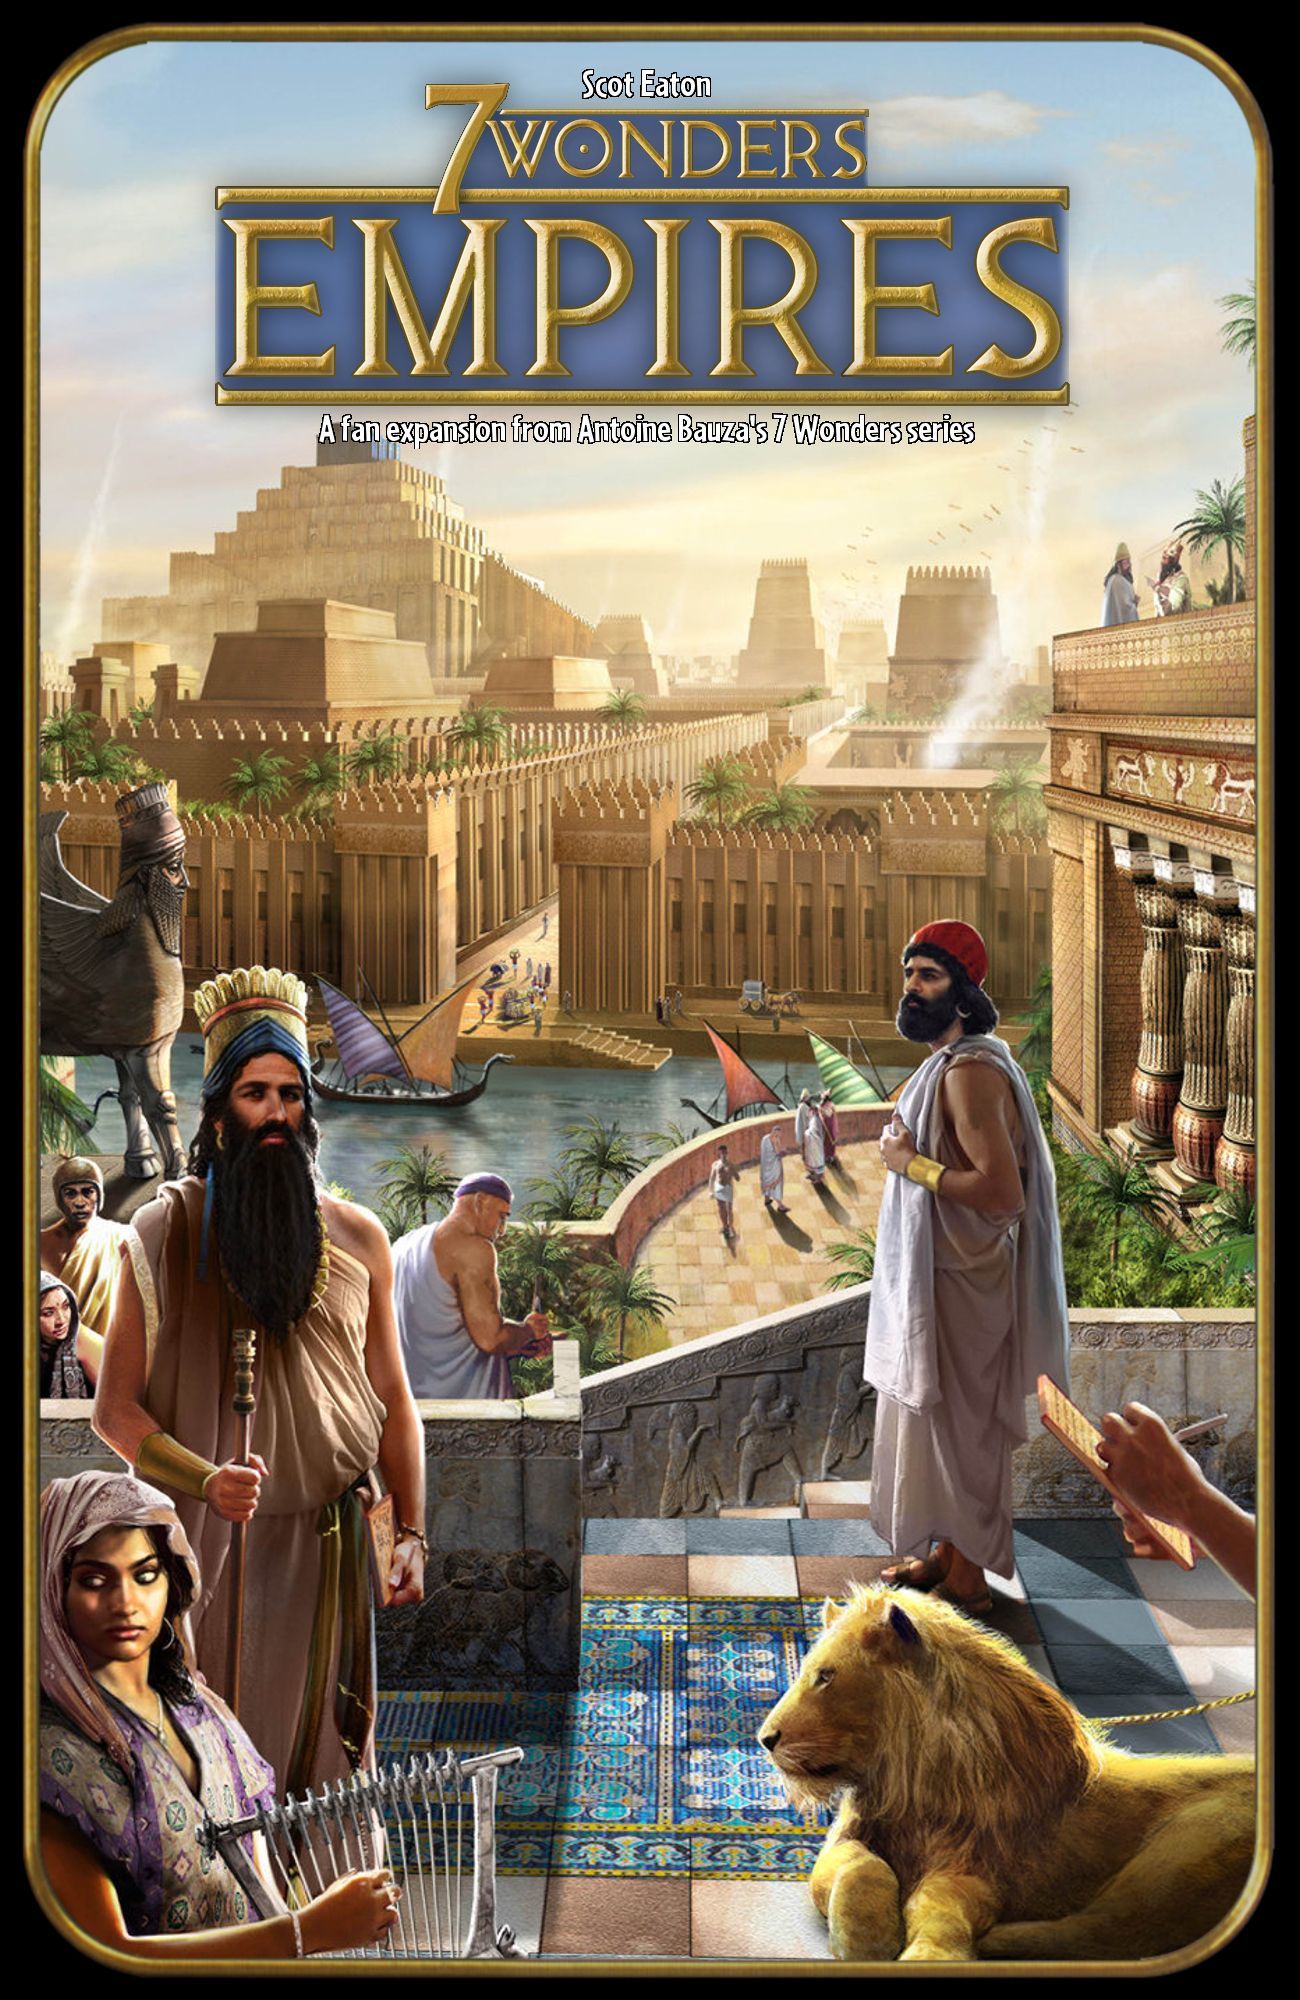 Empires (fan expansion for 7 Wonders)